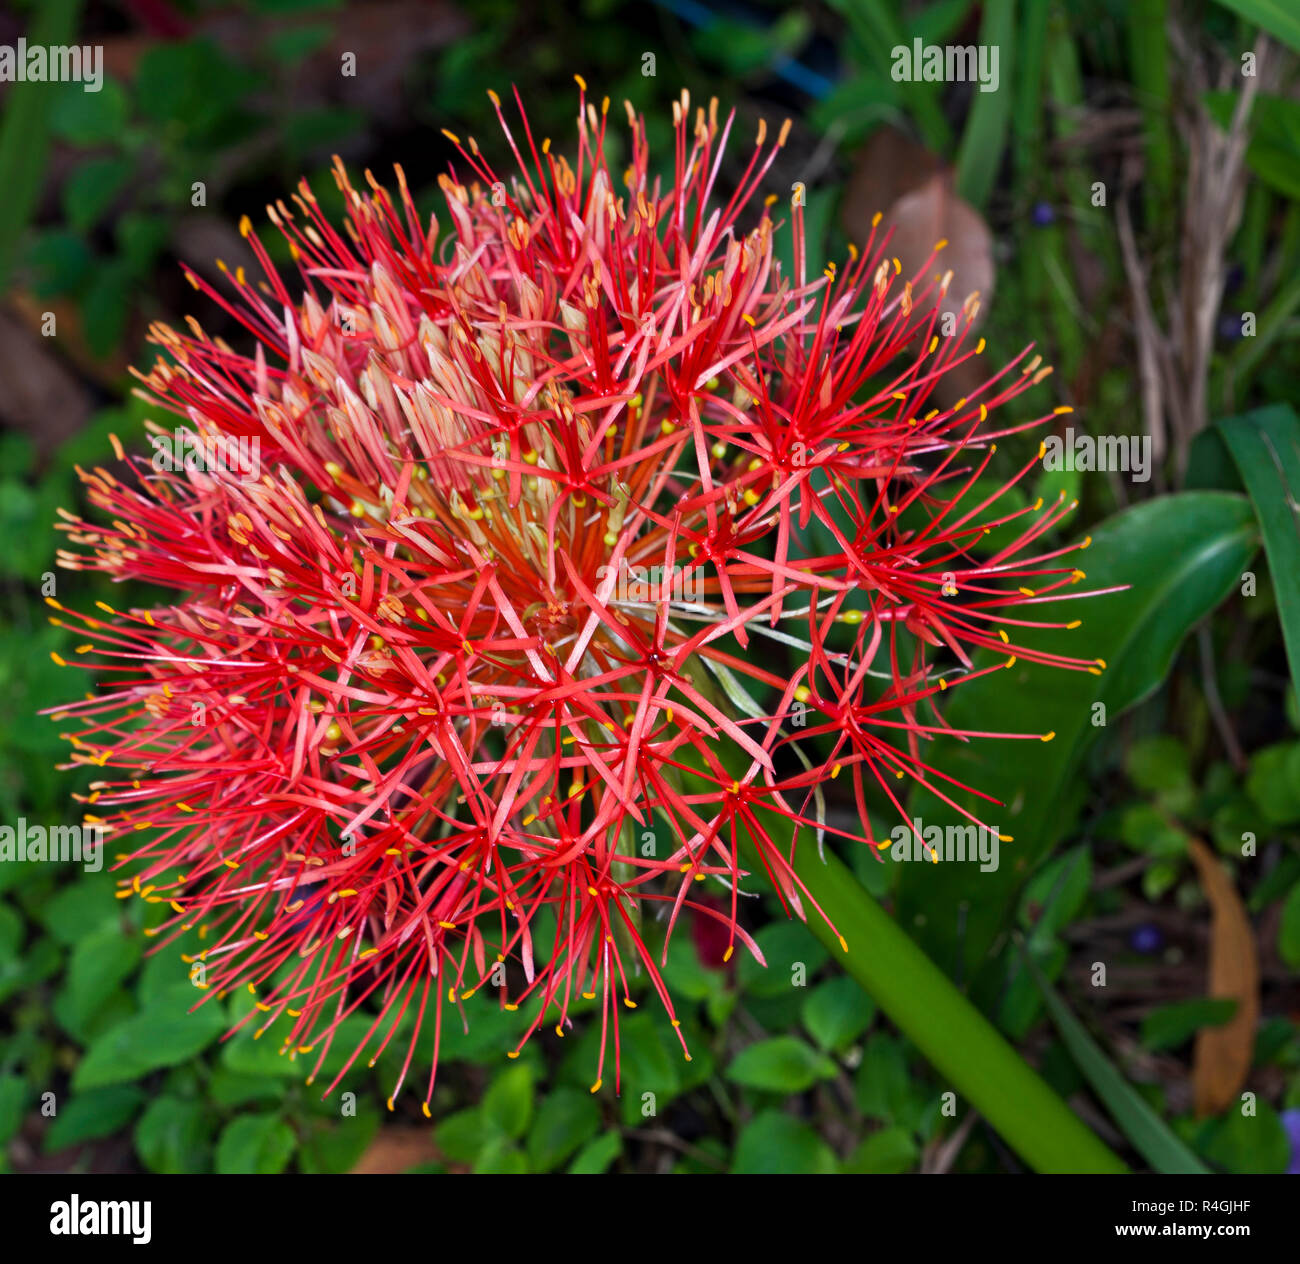 Large globular cluster of vivid red flowers of Scadoxus multiflorus syn. Haemanthus, blood lily, on background of green foliage Stock Photo